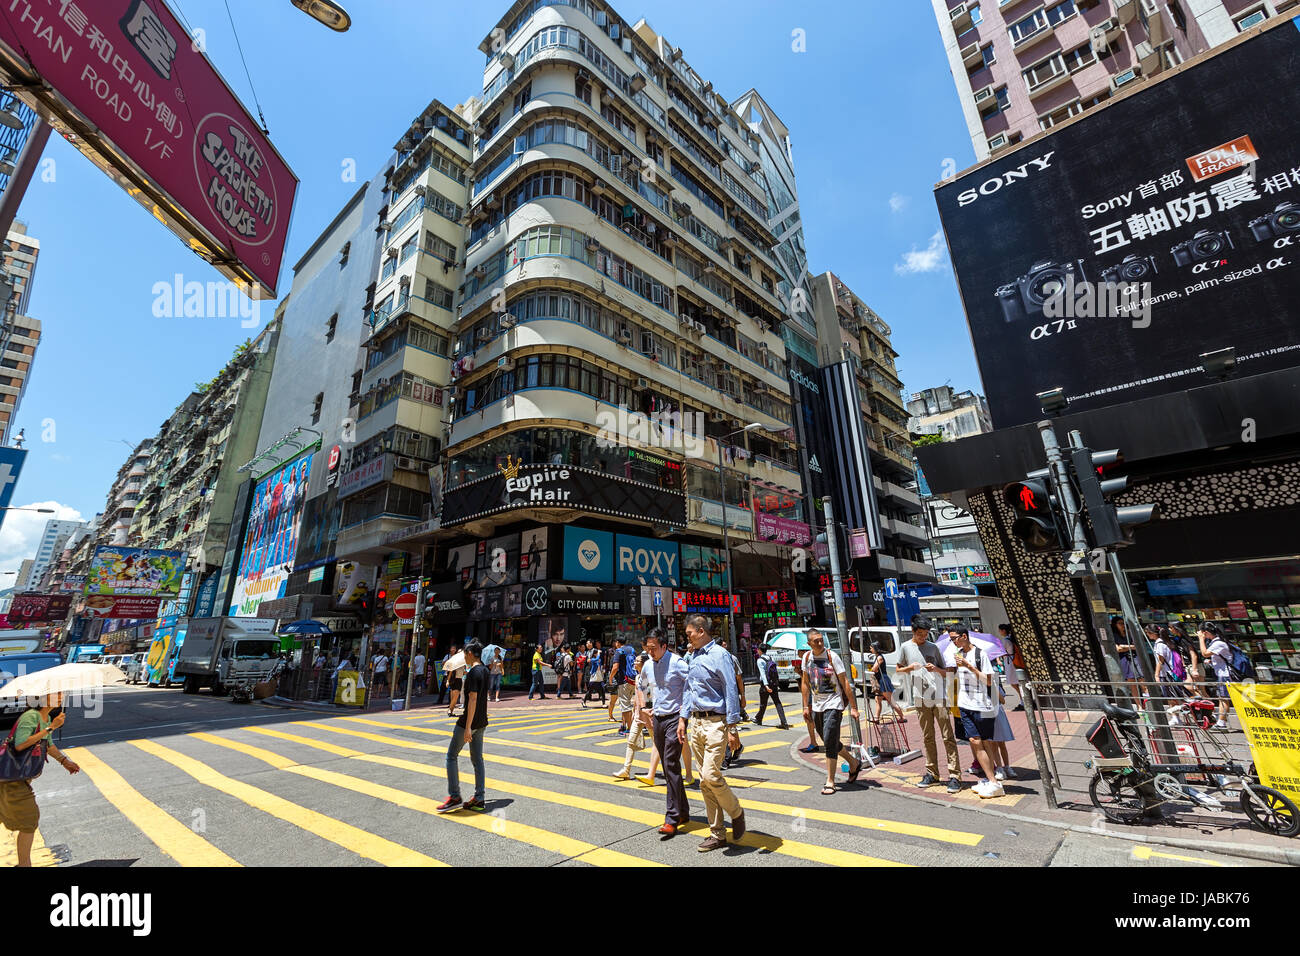 Hong Kong - June 16 2015: Mong kok is characterized by a mixture of old and new multi-story buildings, with shops and restaurants at street level. Stock Photo